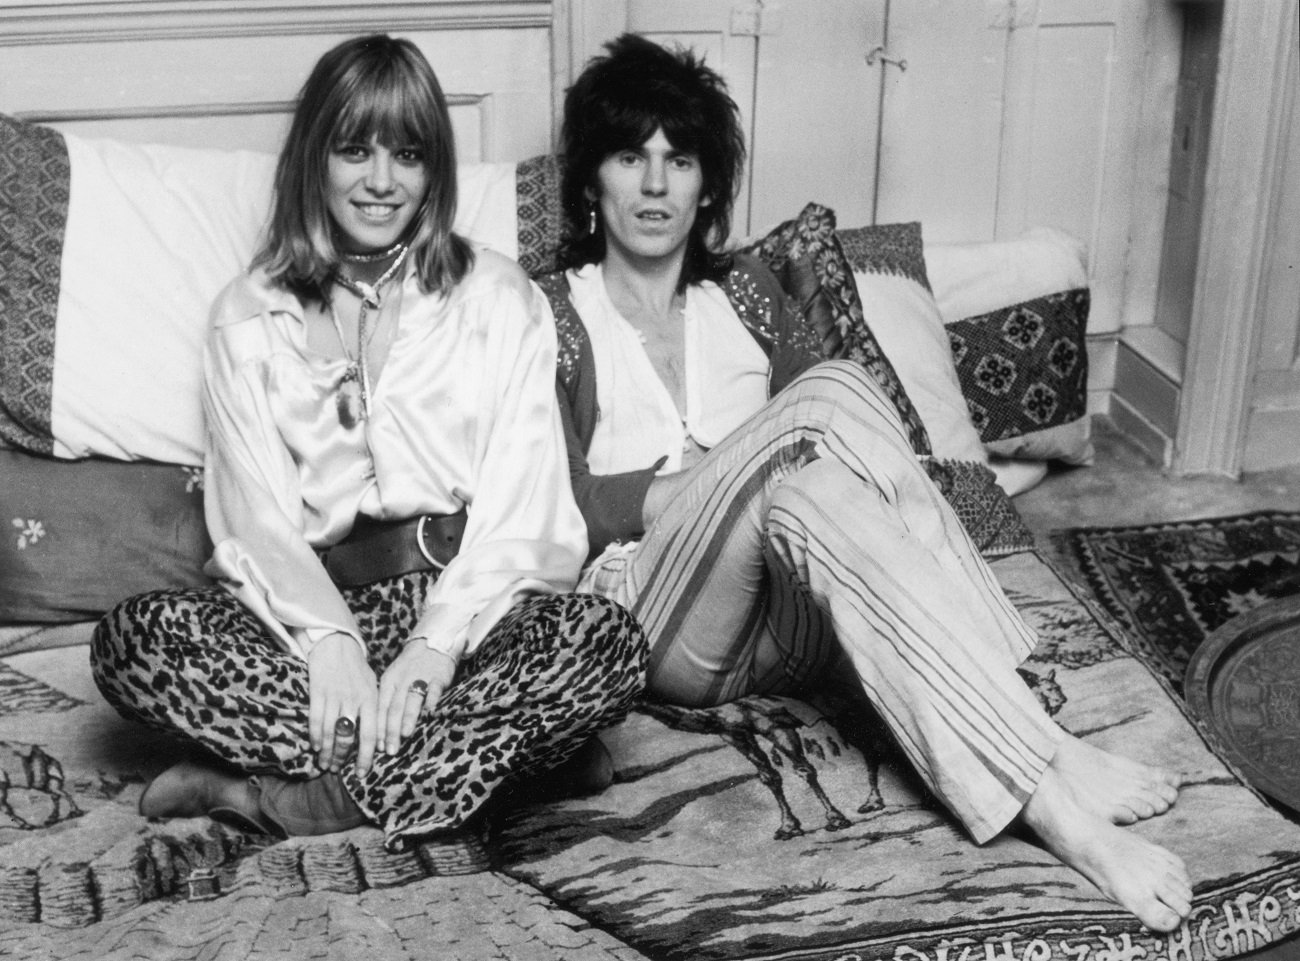 Anita Pallenberg and Keith Richards sit leaning against pillows.